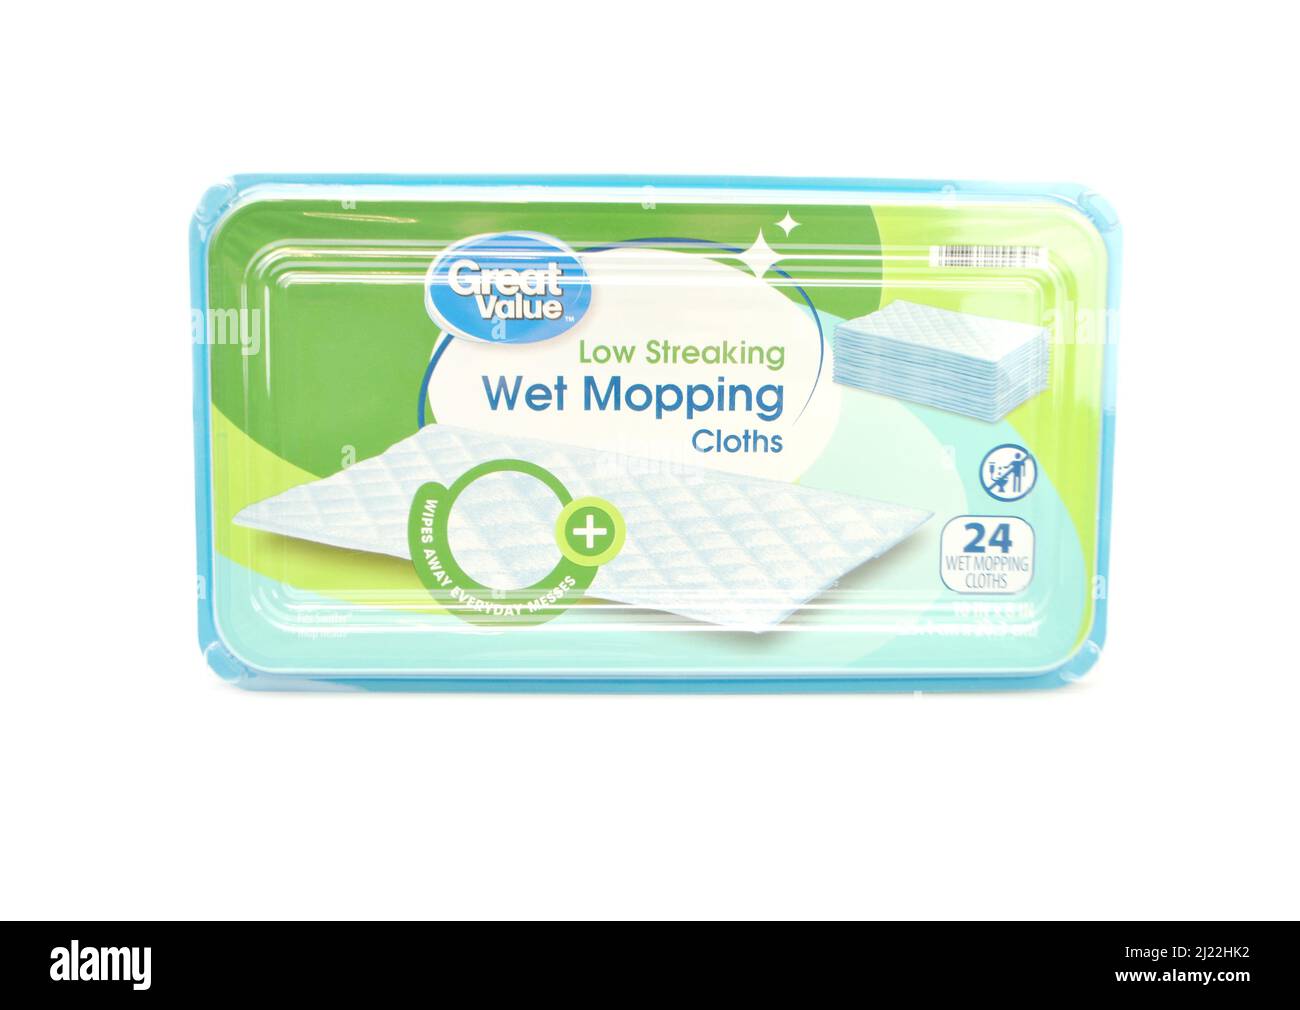 Great Value (Walmart Brand) Wet Mopping Cloths-Low Streaking Stock Photo